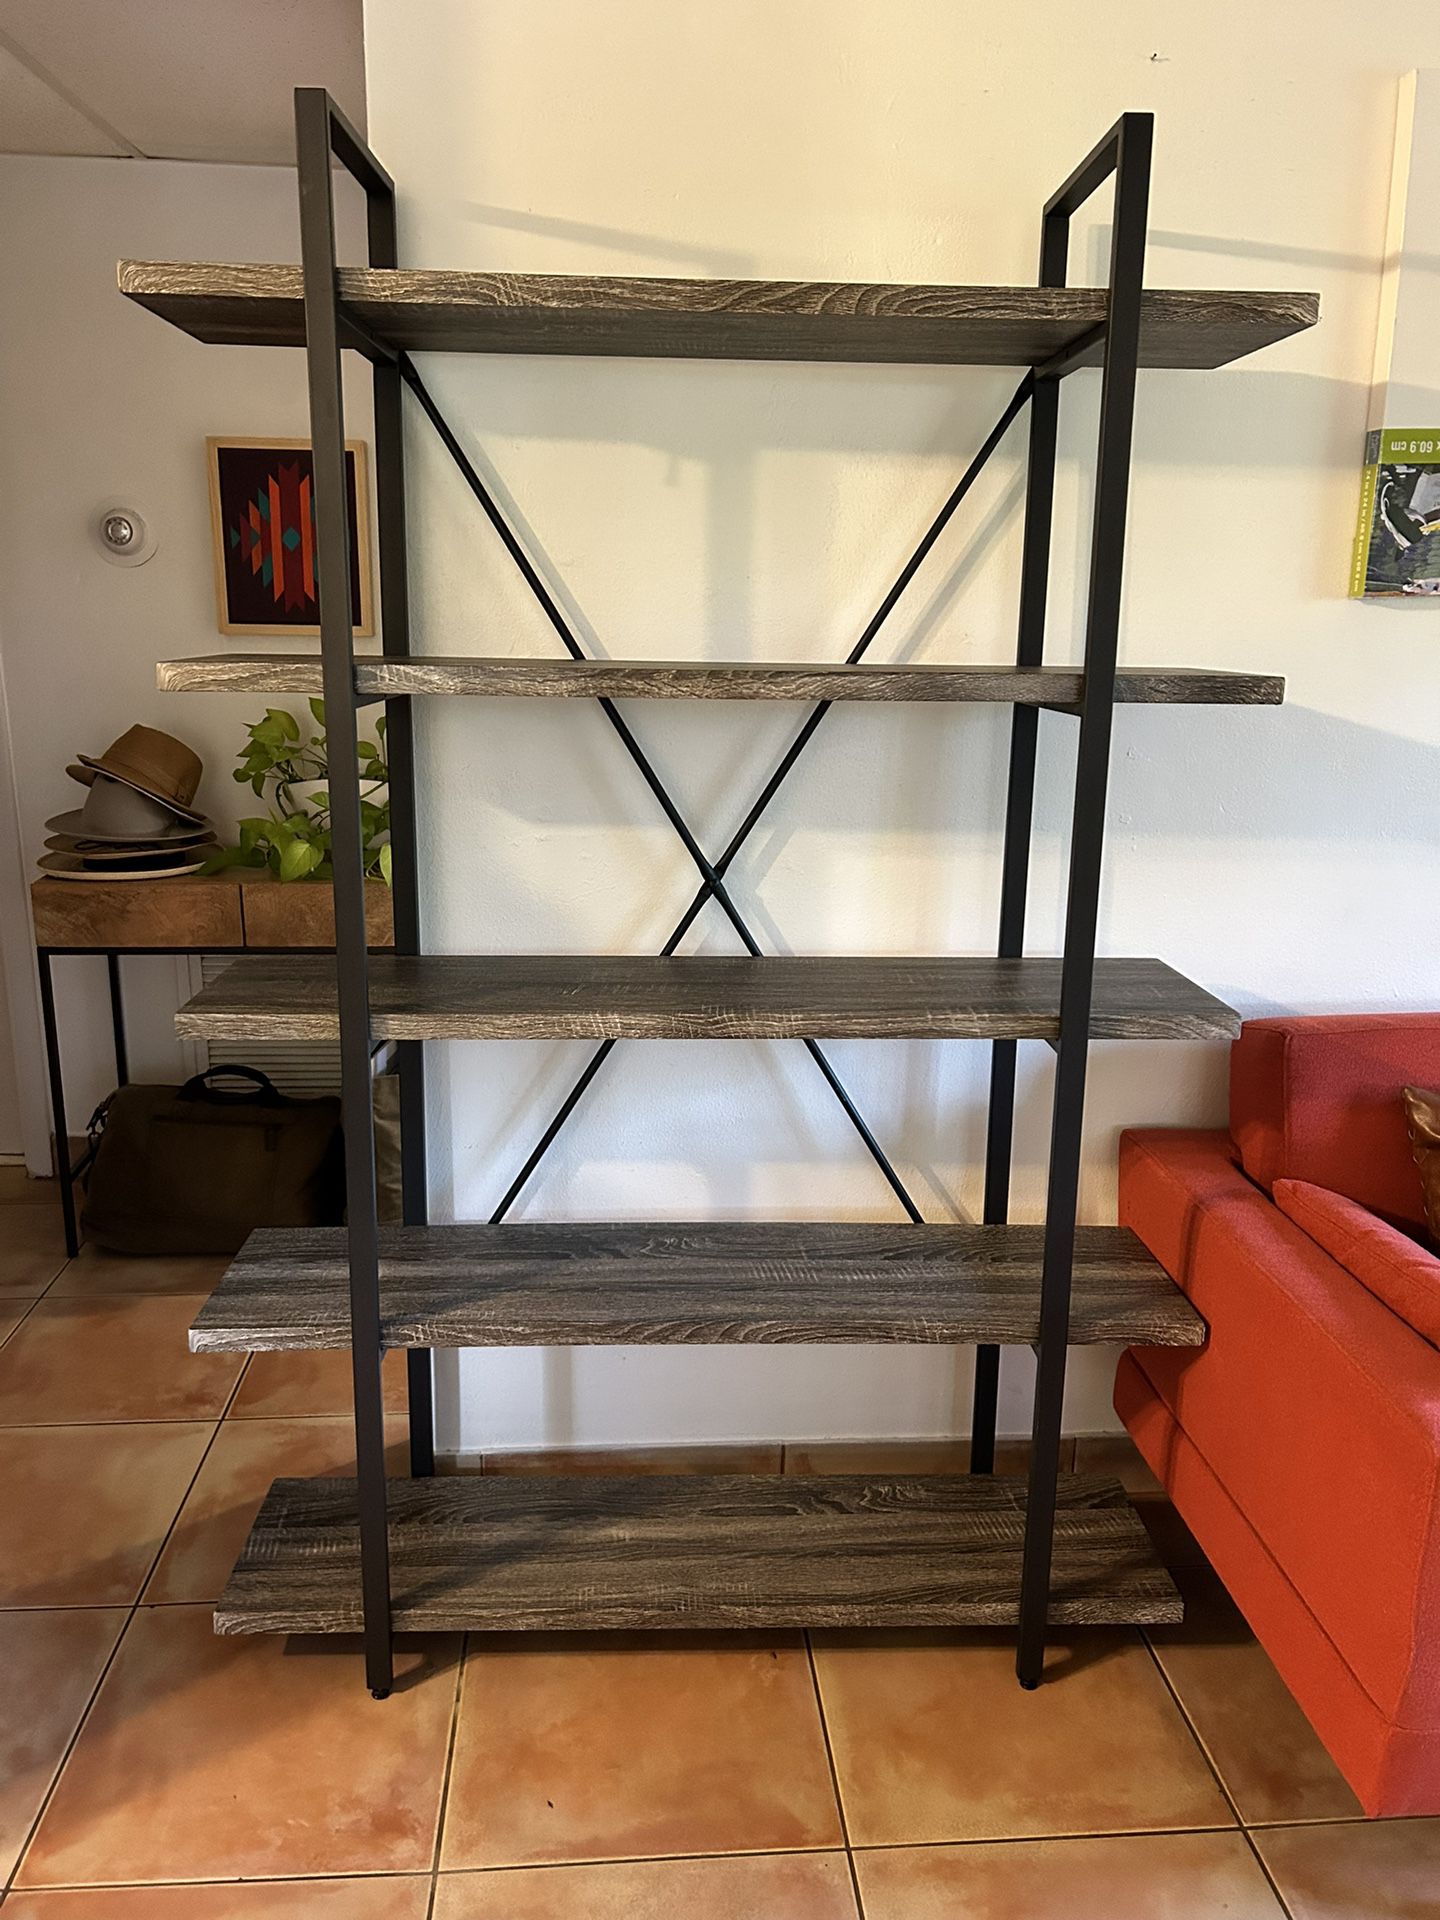 5 Tiers Shelf Unit,      STILL AVAILABLE!! May 12